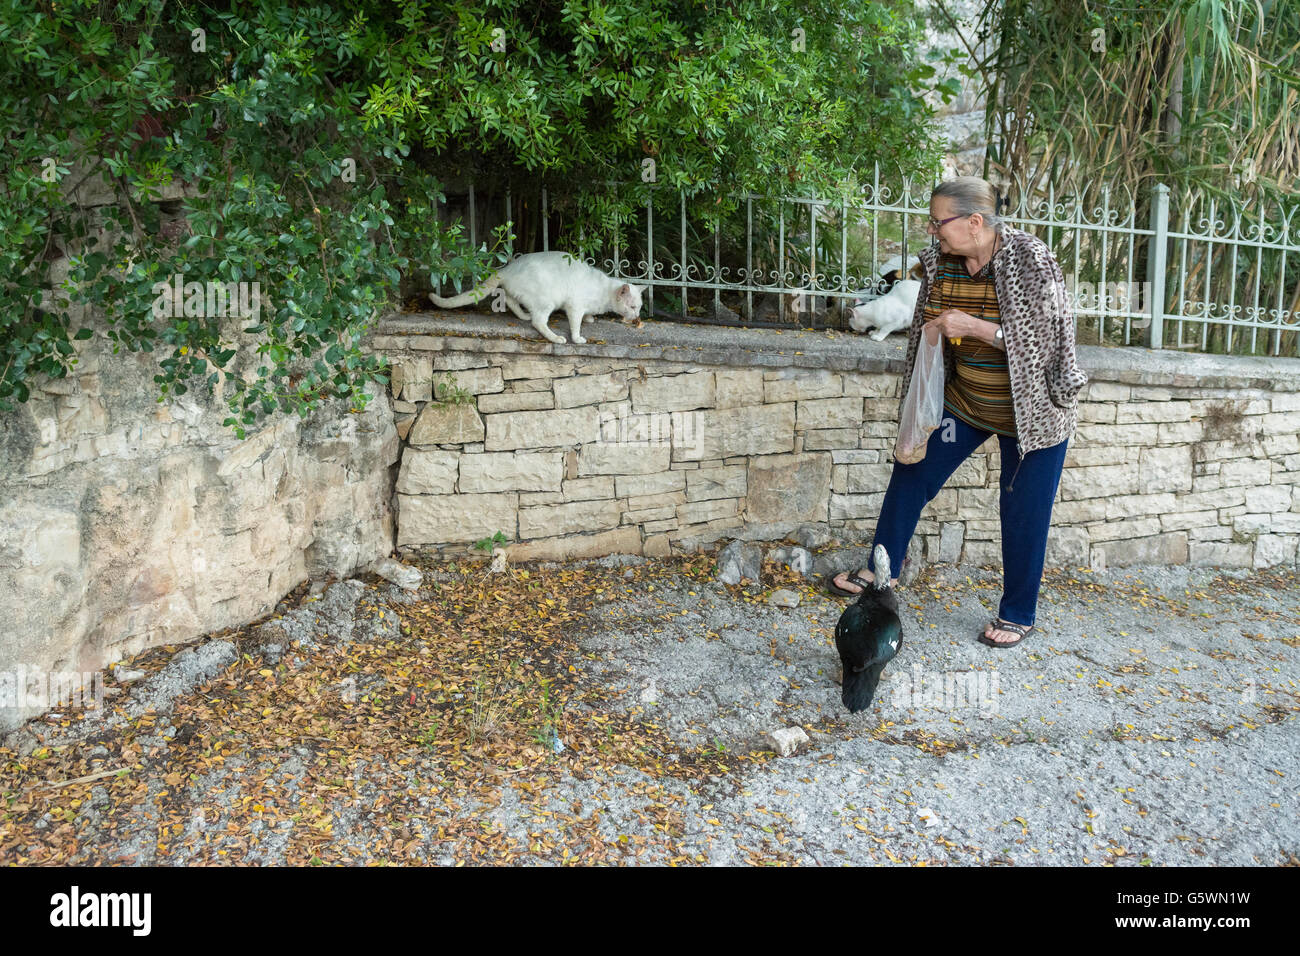 A resident of Lakka on the island of Paxos feeding feral cats (and duck) early morning Stock Photo